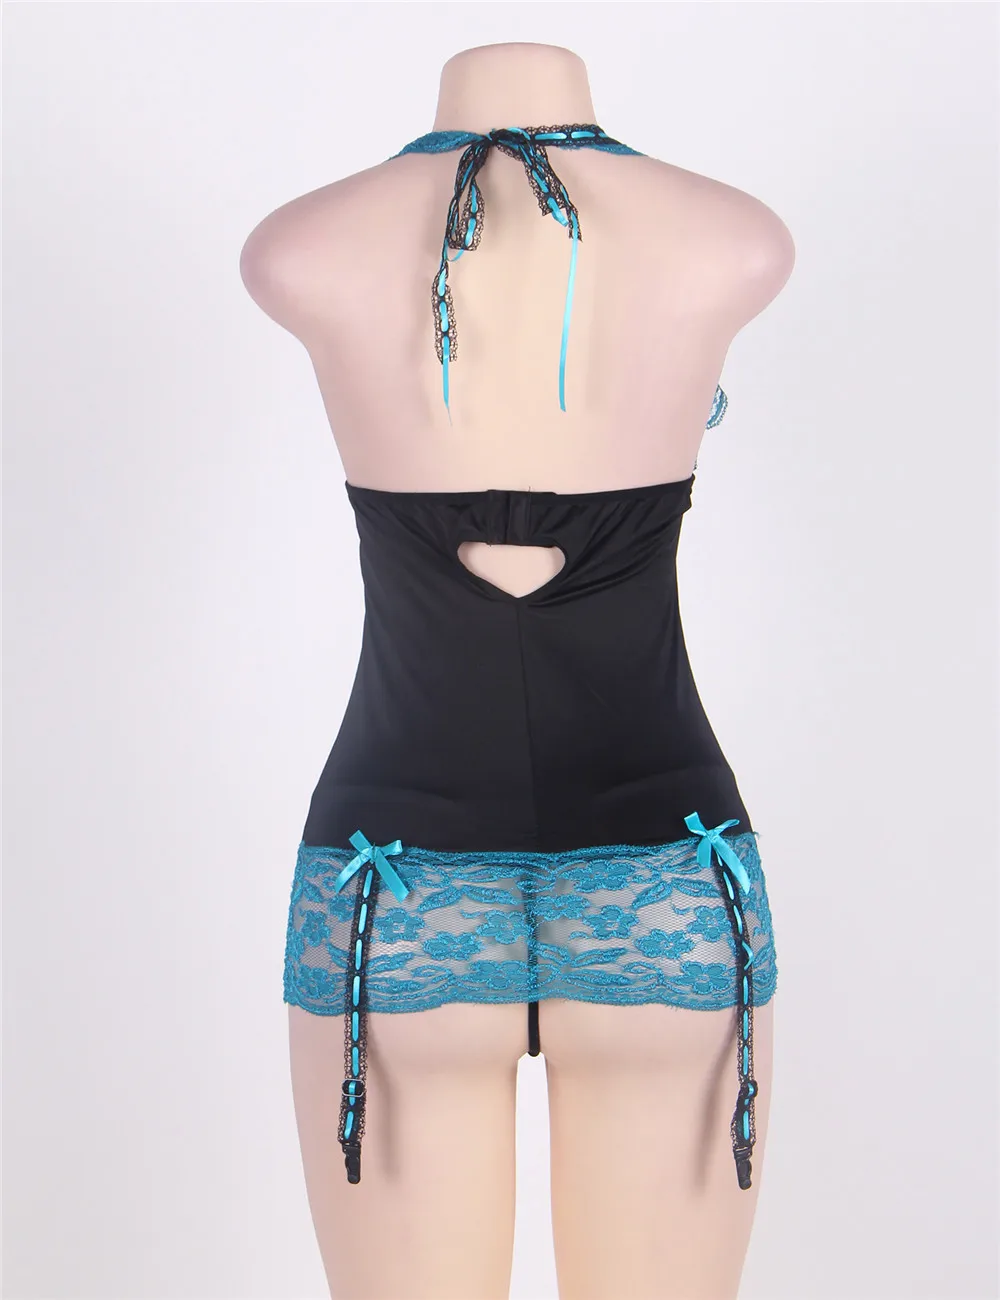 Light Blue And Black New Fashion Sexy Mature Women Lingerie Underwear New Design Buy Sexy 